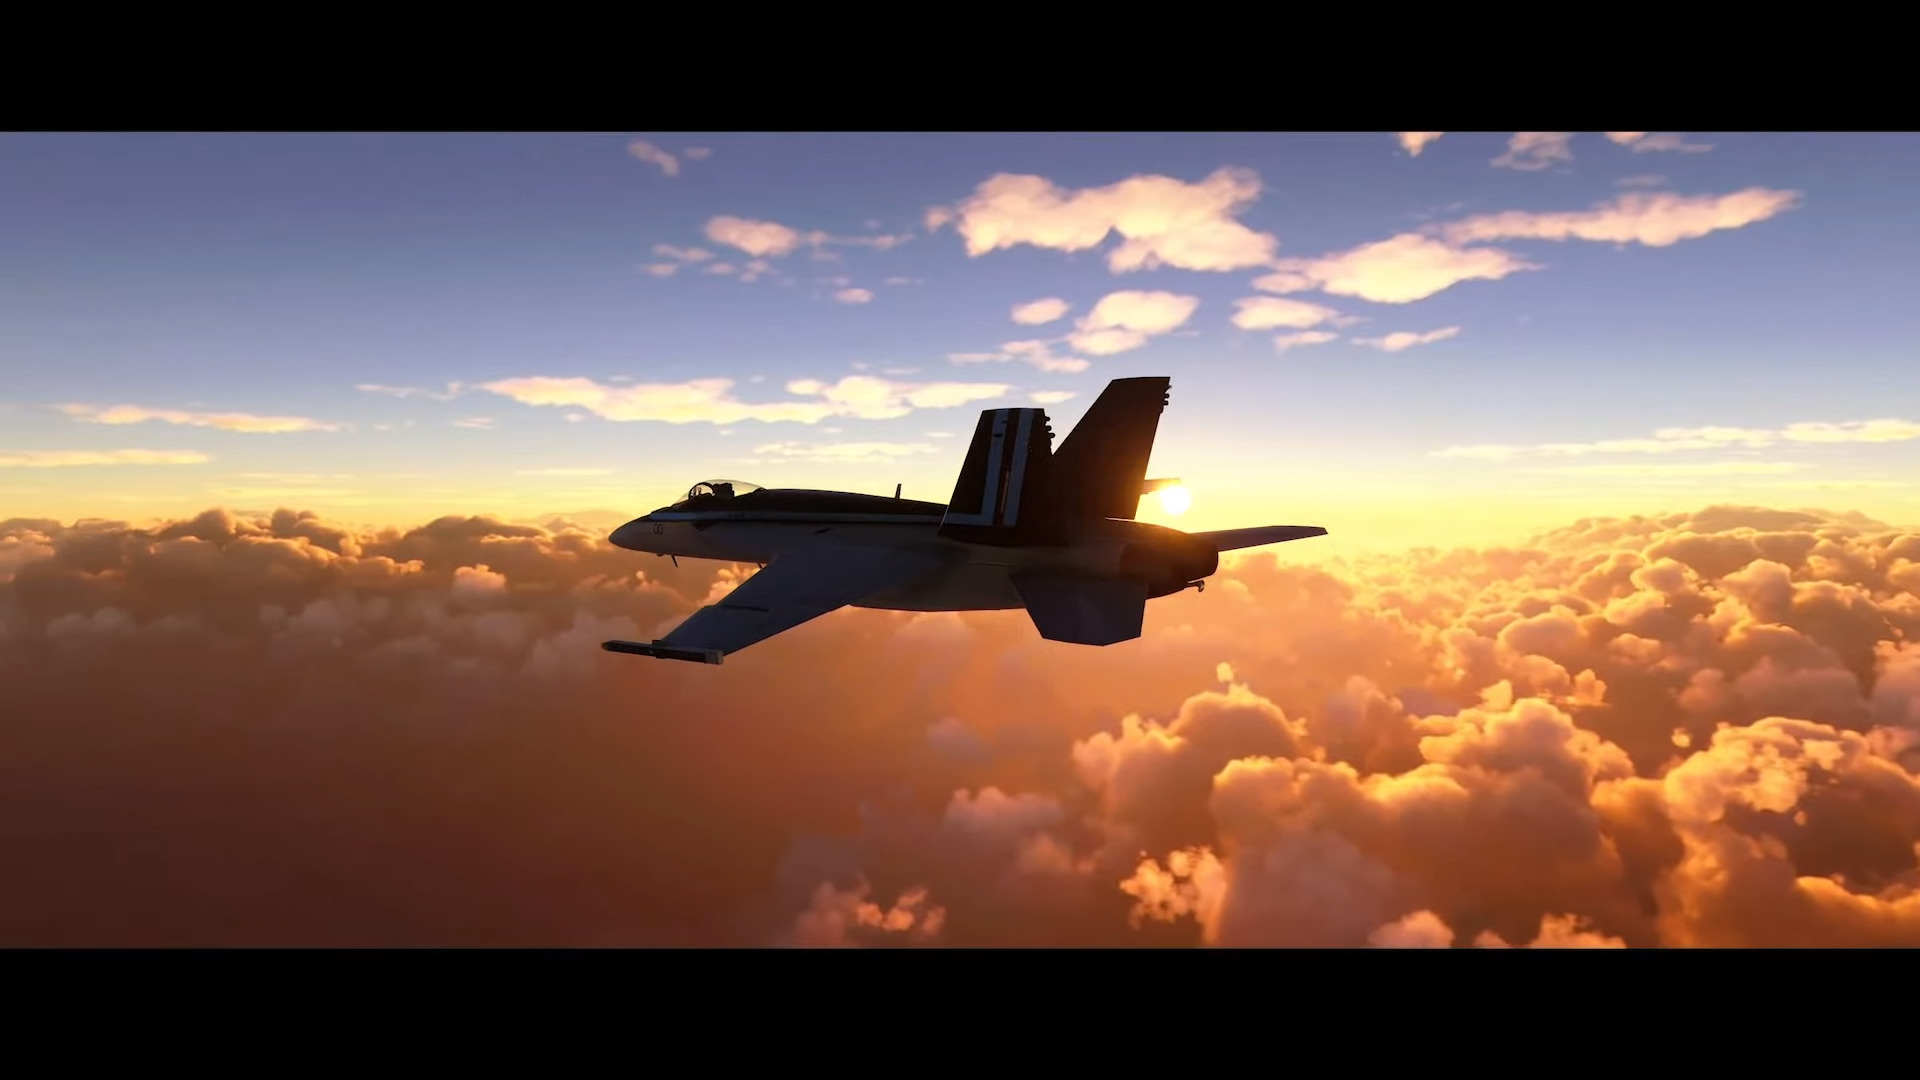 Xbox Series X, S Owners Can Play Microsoft Flight Simulator on July 27